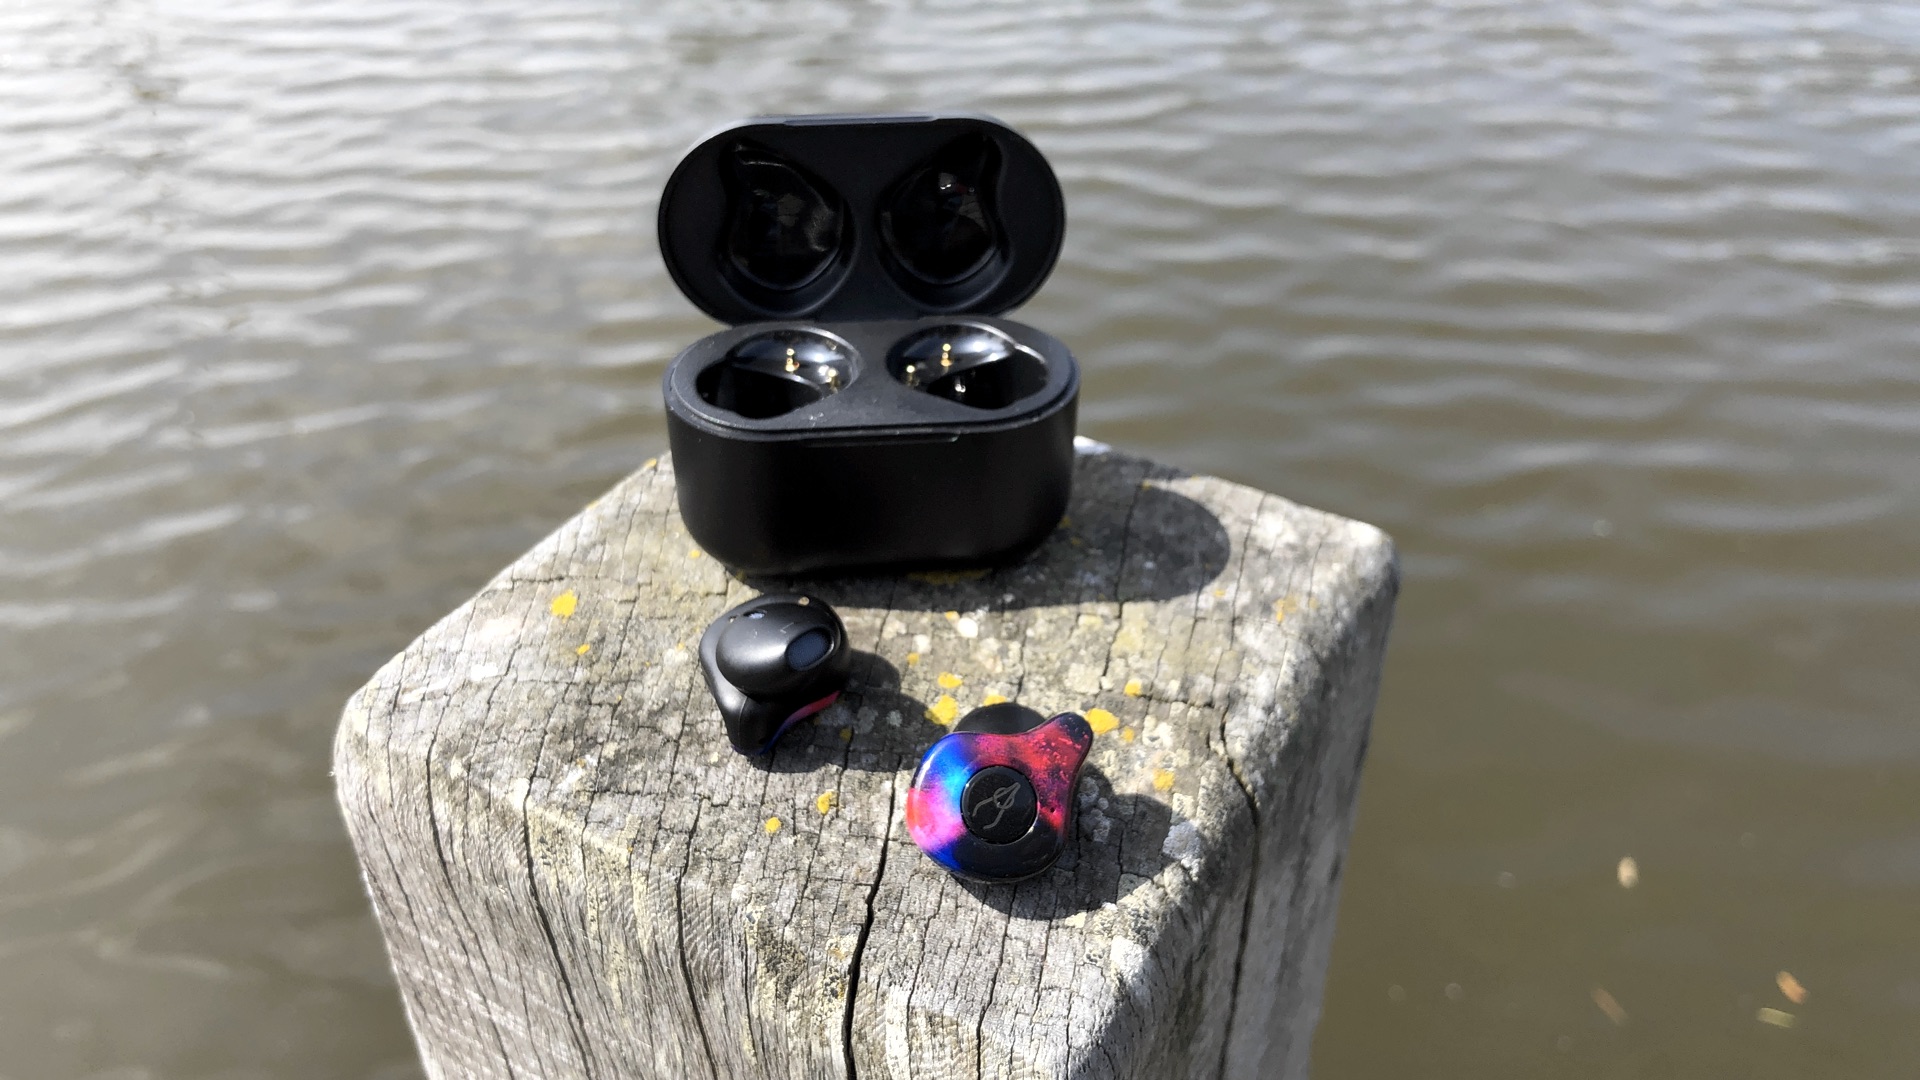 x12 pro earbuds